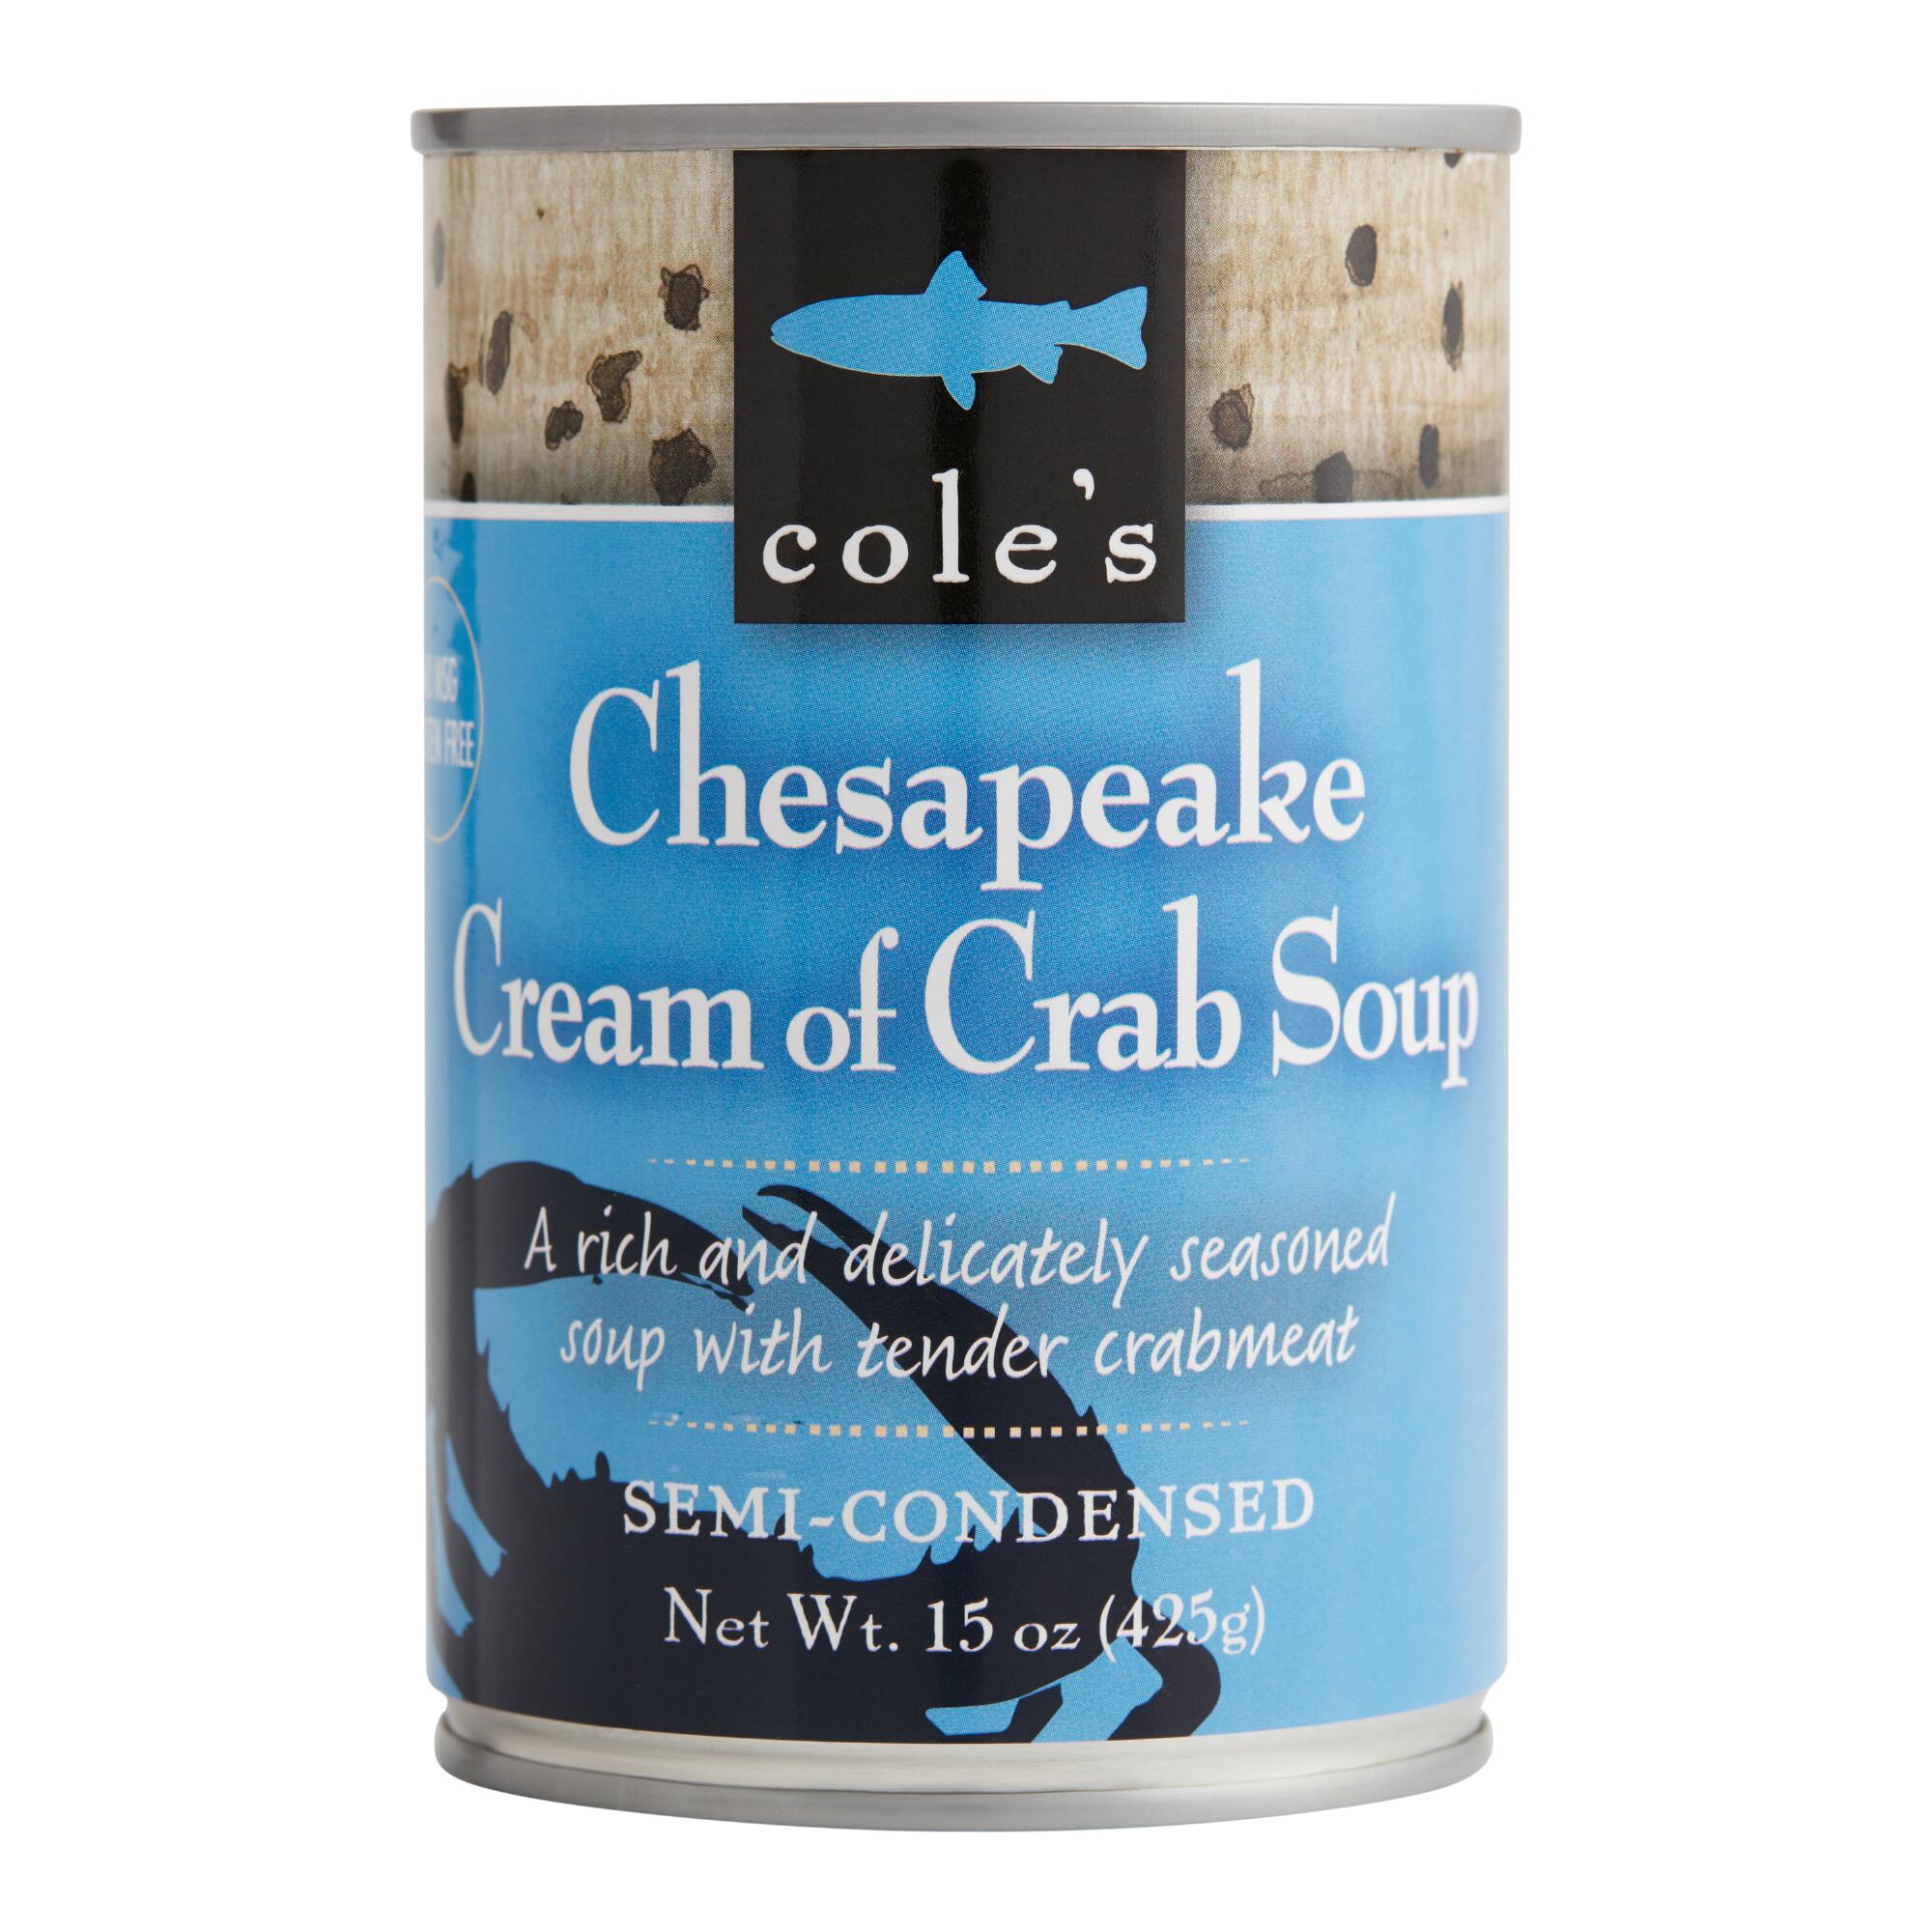 Cole's Chesapeake Cream of Crab Soup by World Market